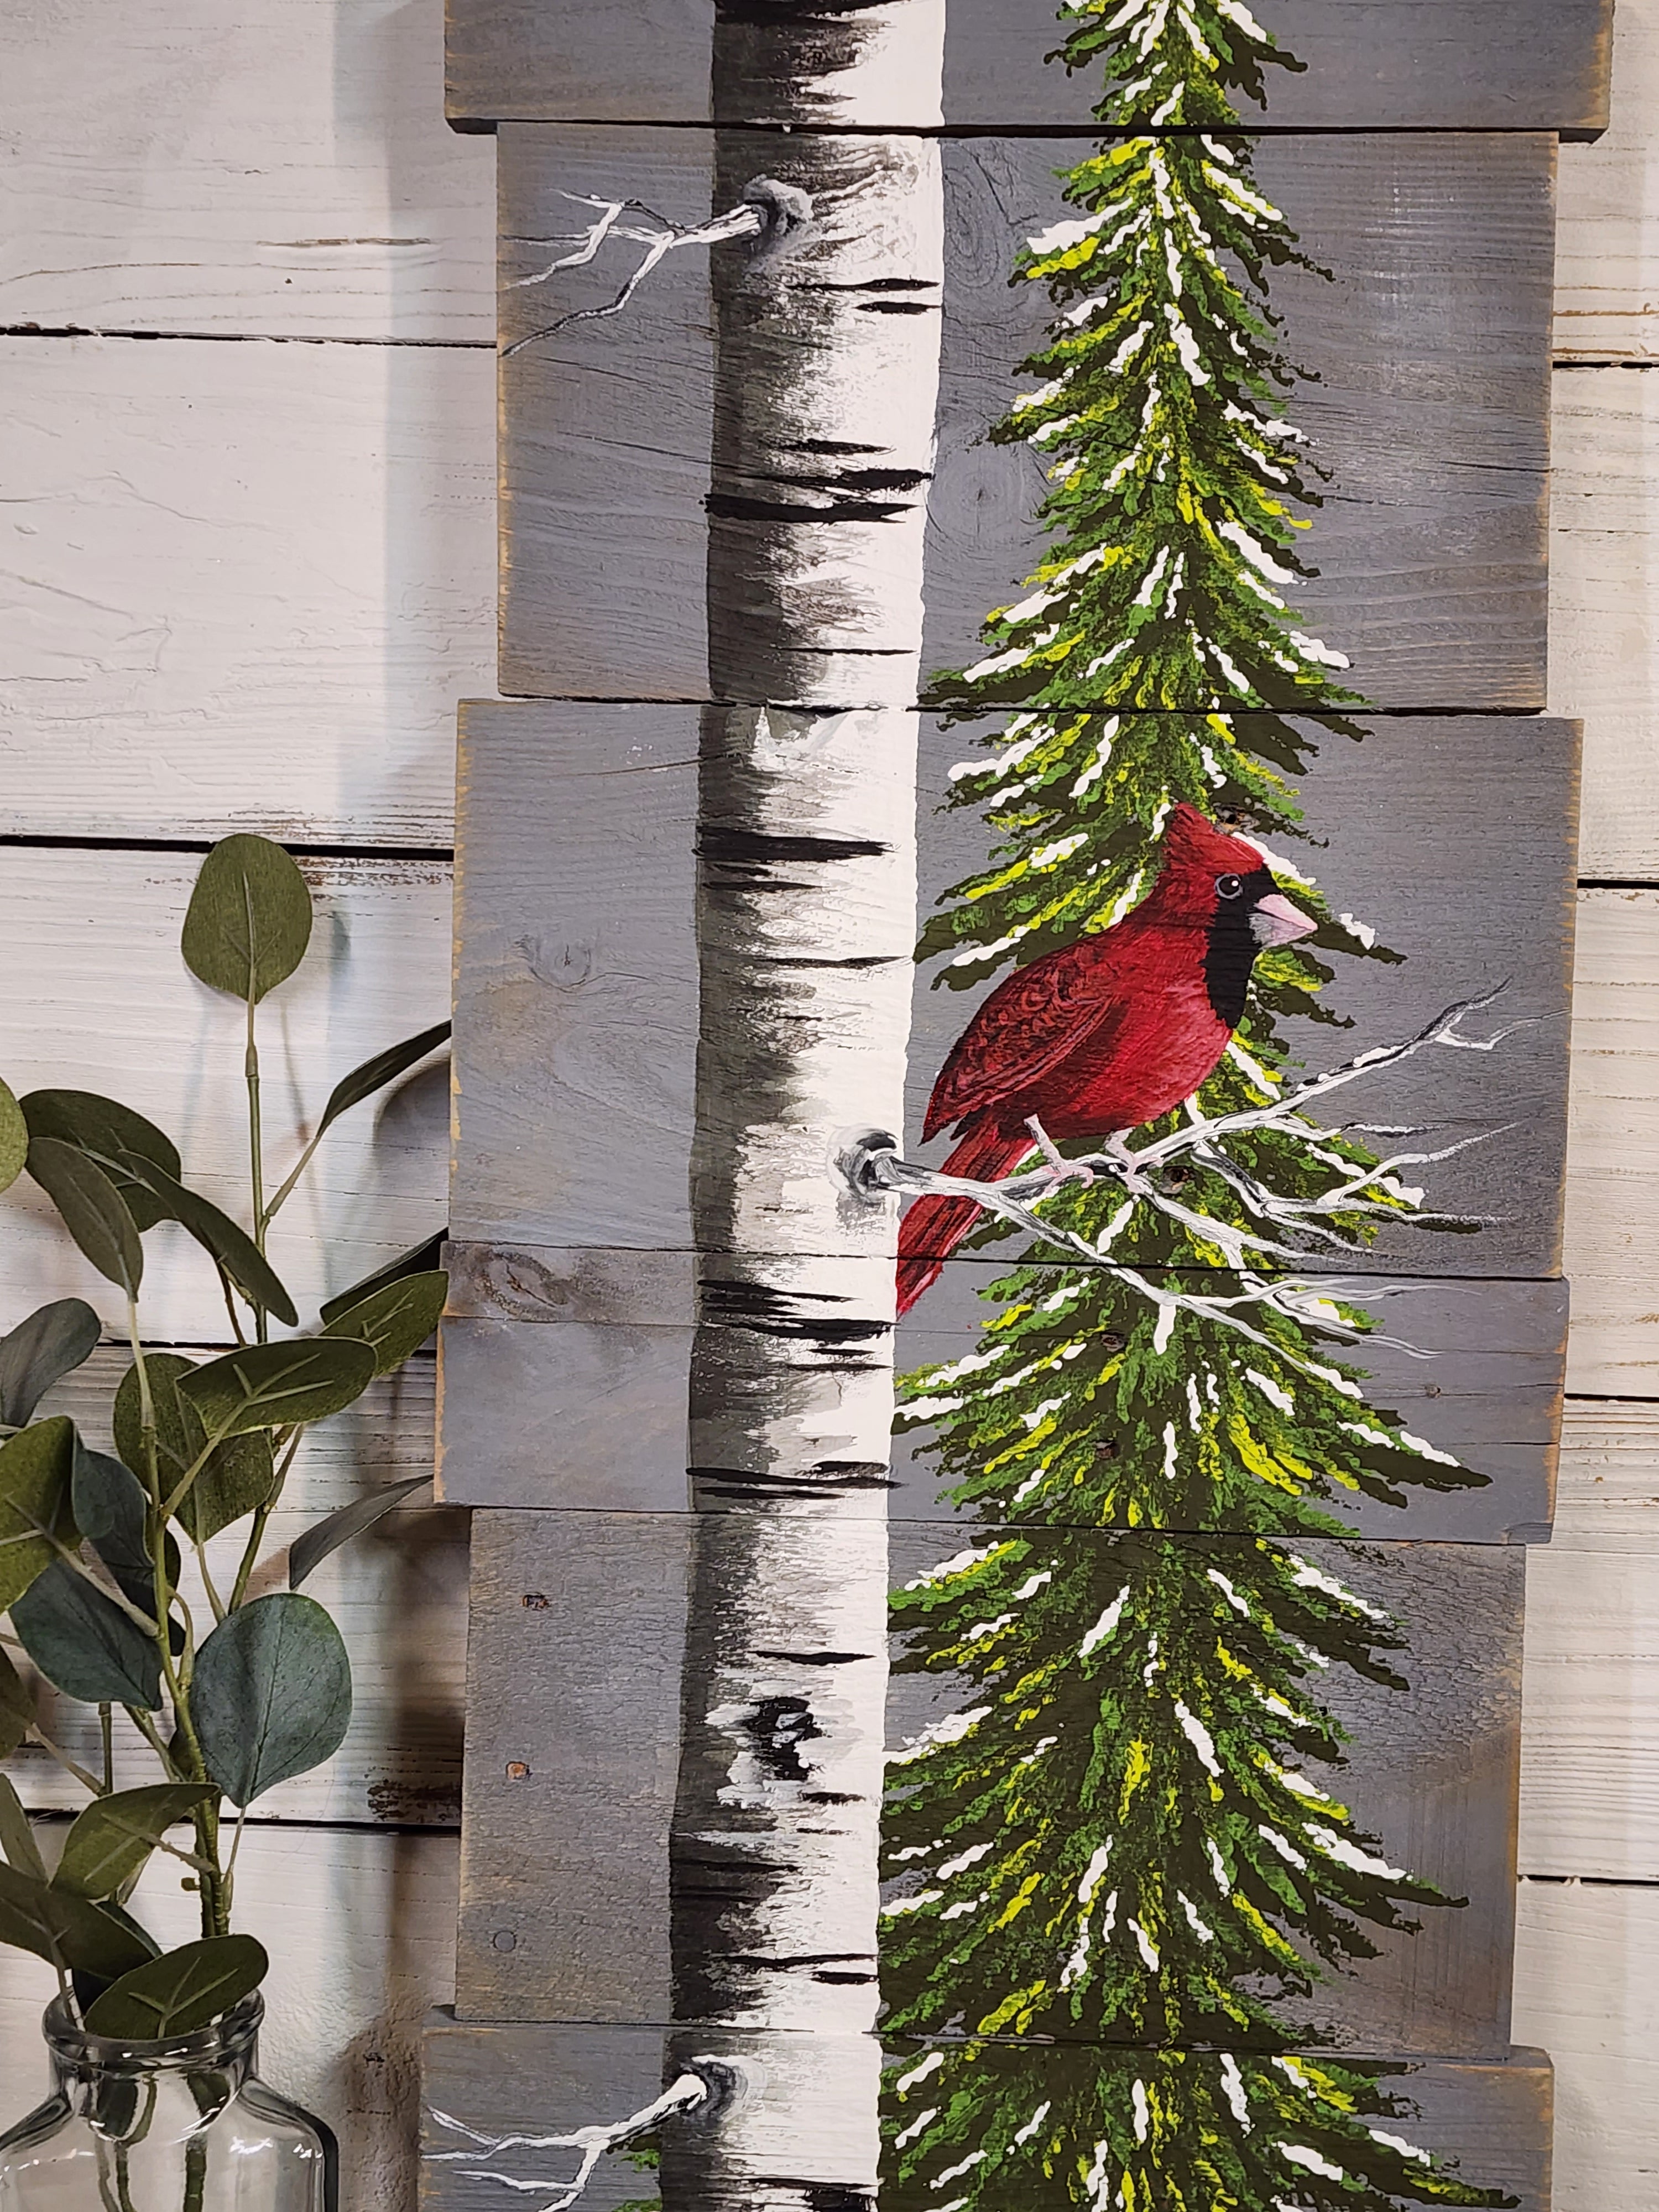 Hand painted Cardinal in winter pine tree, Tall White Birch and evergreen with snow on pallet wood